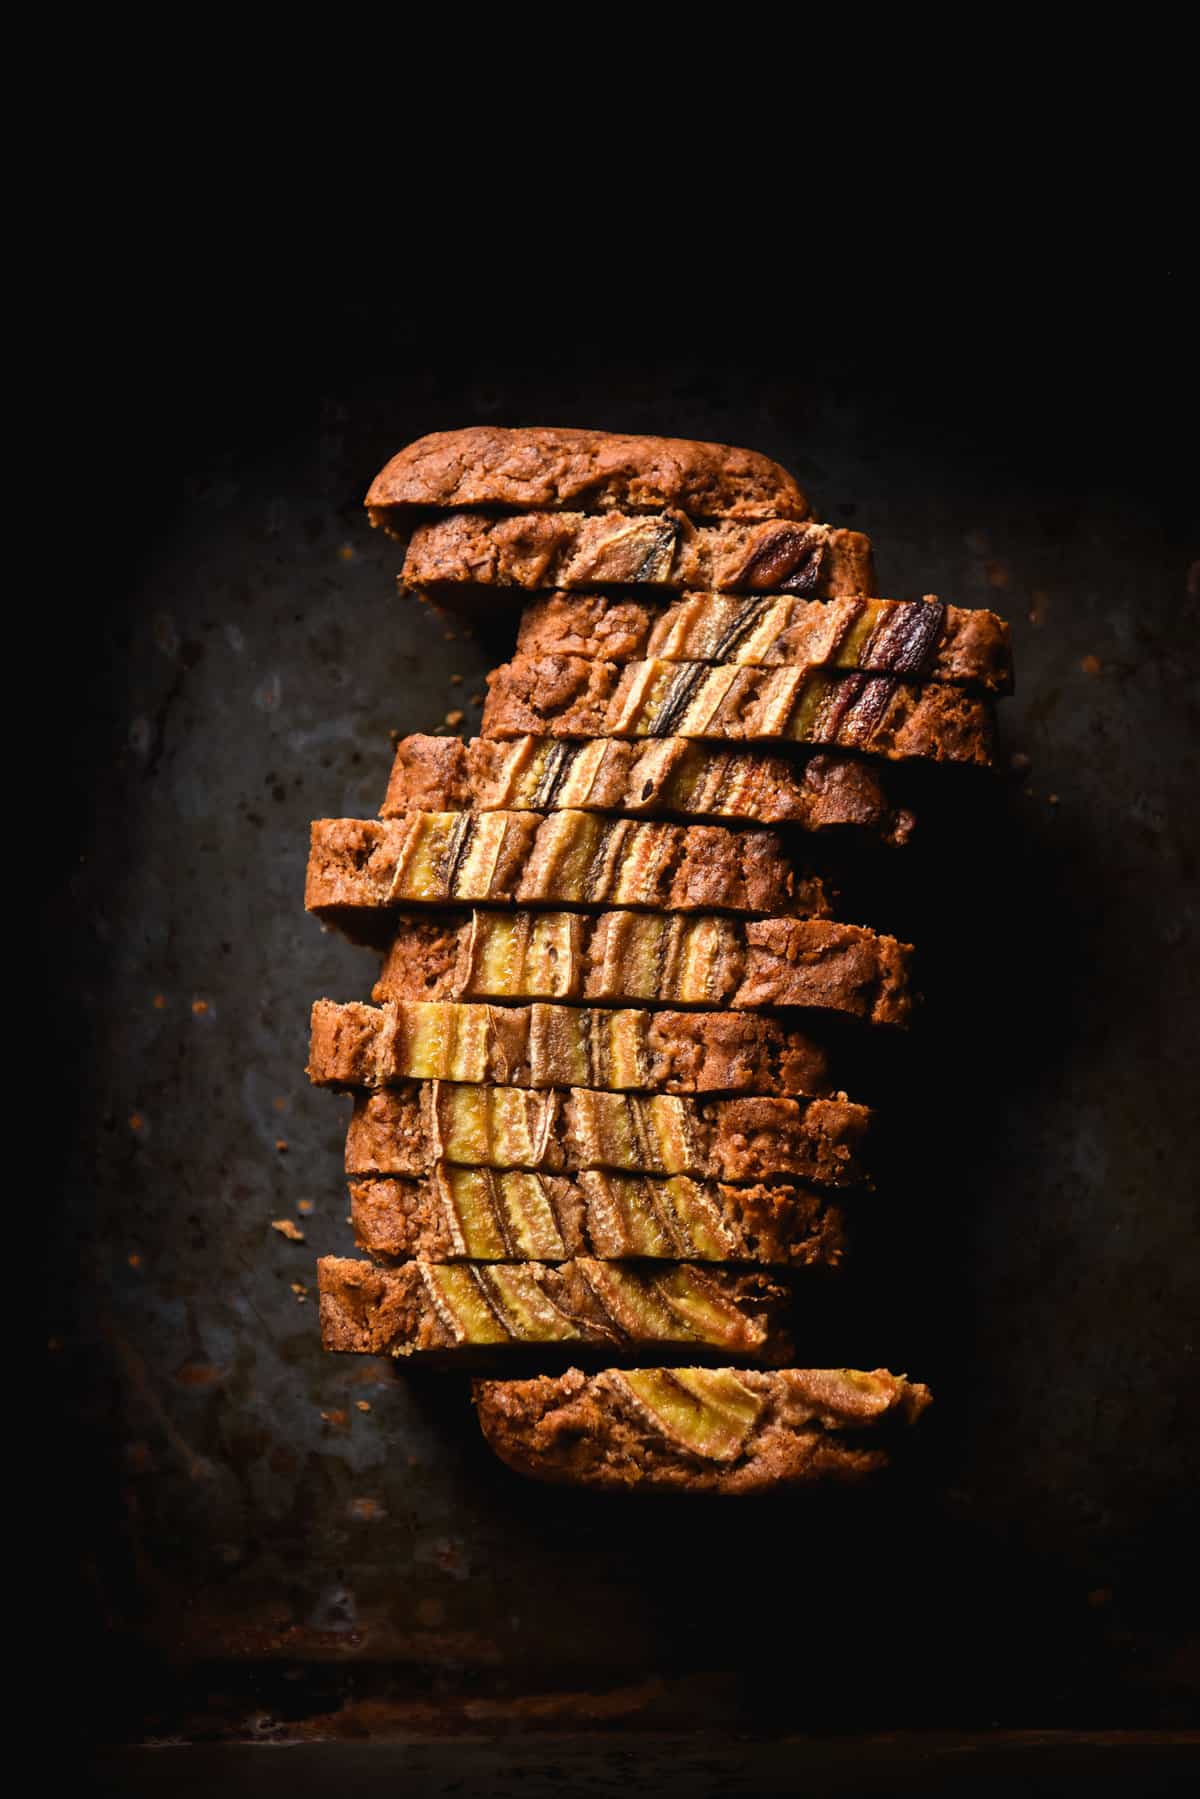 A dark and moody aerial image of a loaf of gluten free vegan banana bread that has been sliced and sits atop a dark steel backdrop